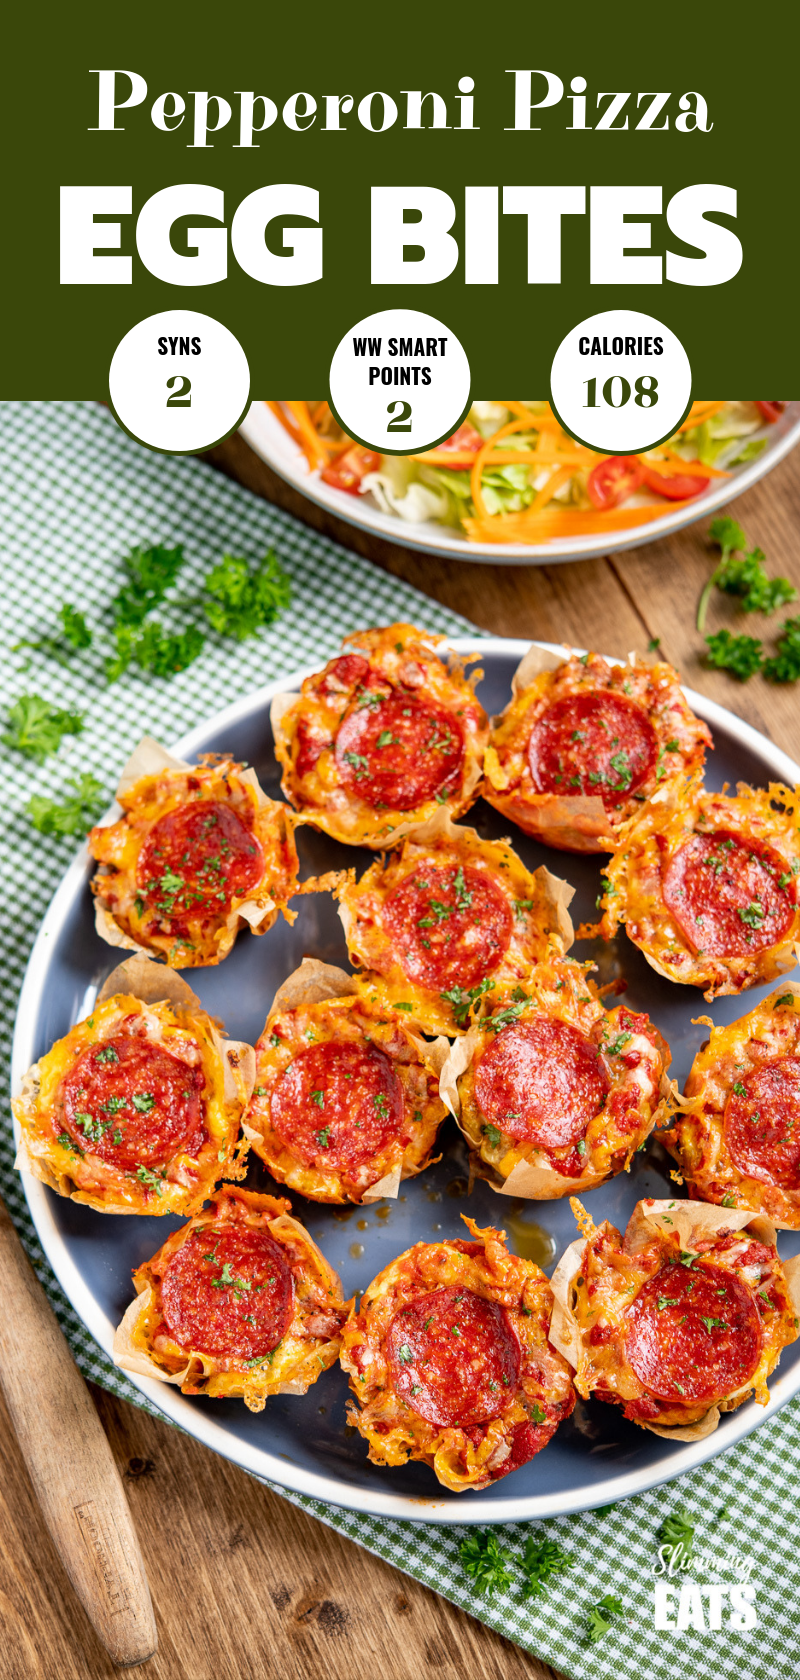 Pepperoni Pizza Egg Bites on a blue plate with green checked tea towel pin image